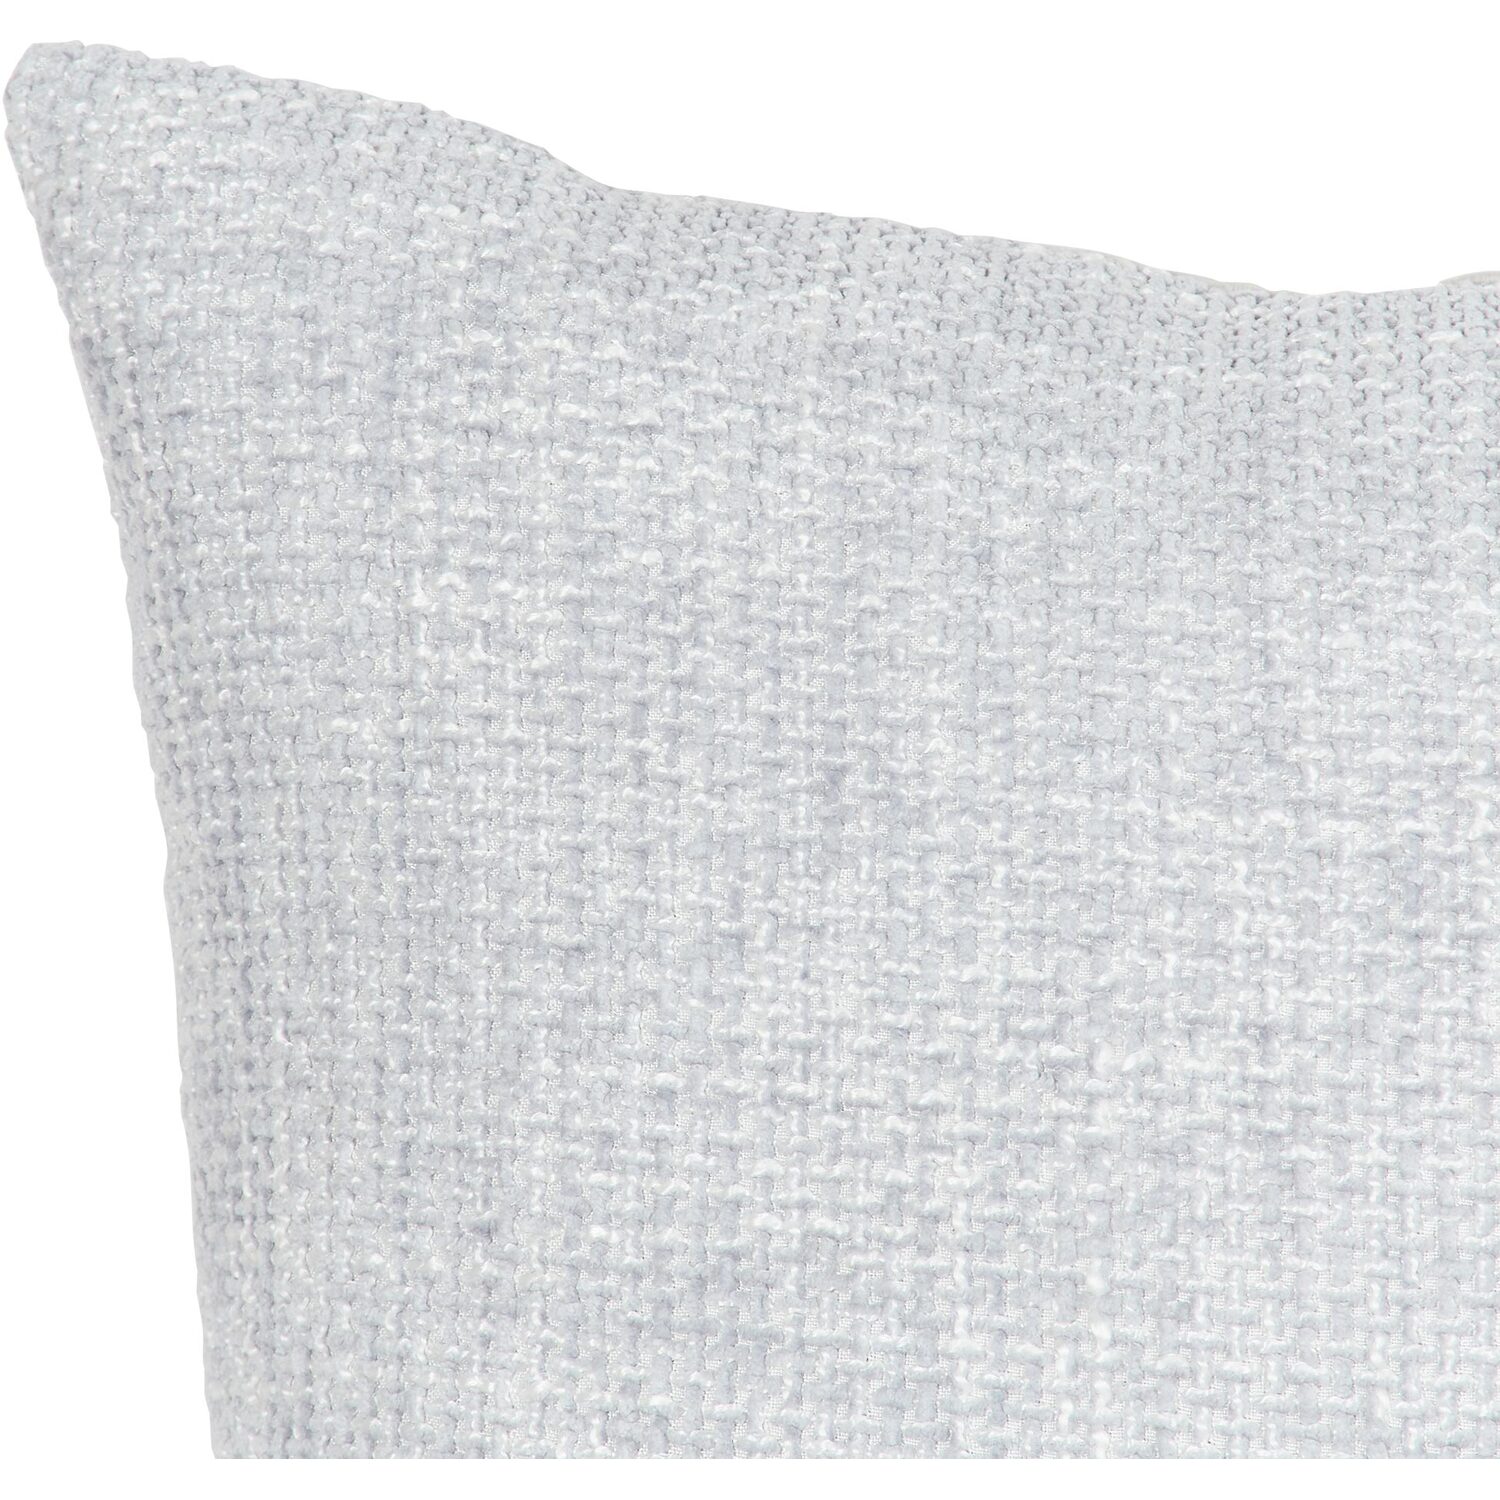 Chenille Boucle Cushion - Silver Image 4